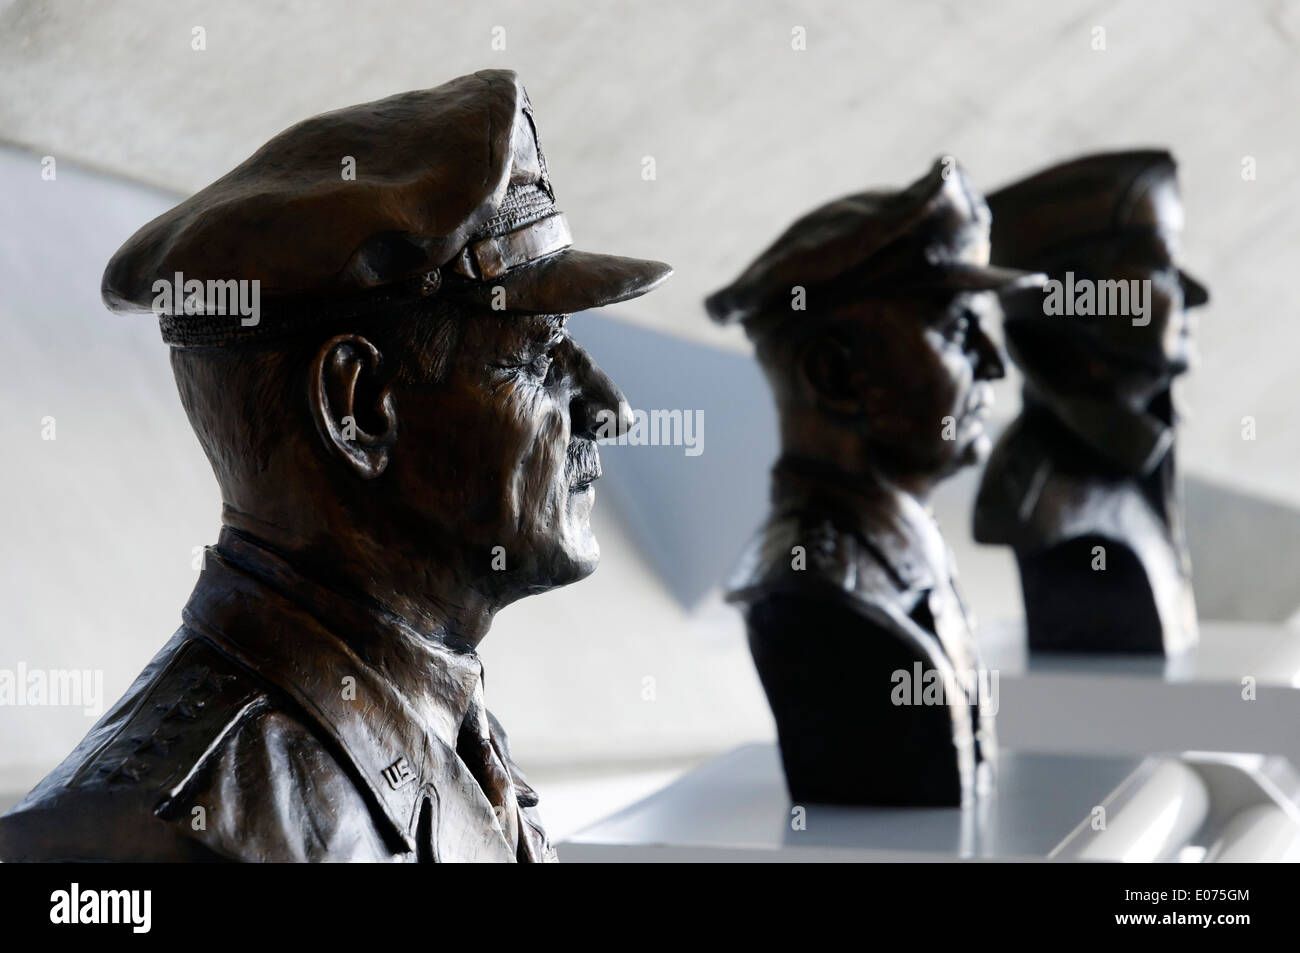 Busts of USAF Eighth Air Force commander James Doolittle, Carl Spaatz and Ira Eaker at Duxford Air Museum, England Stock Photo